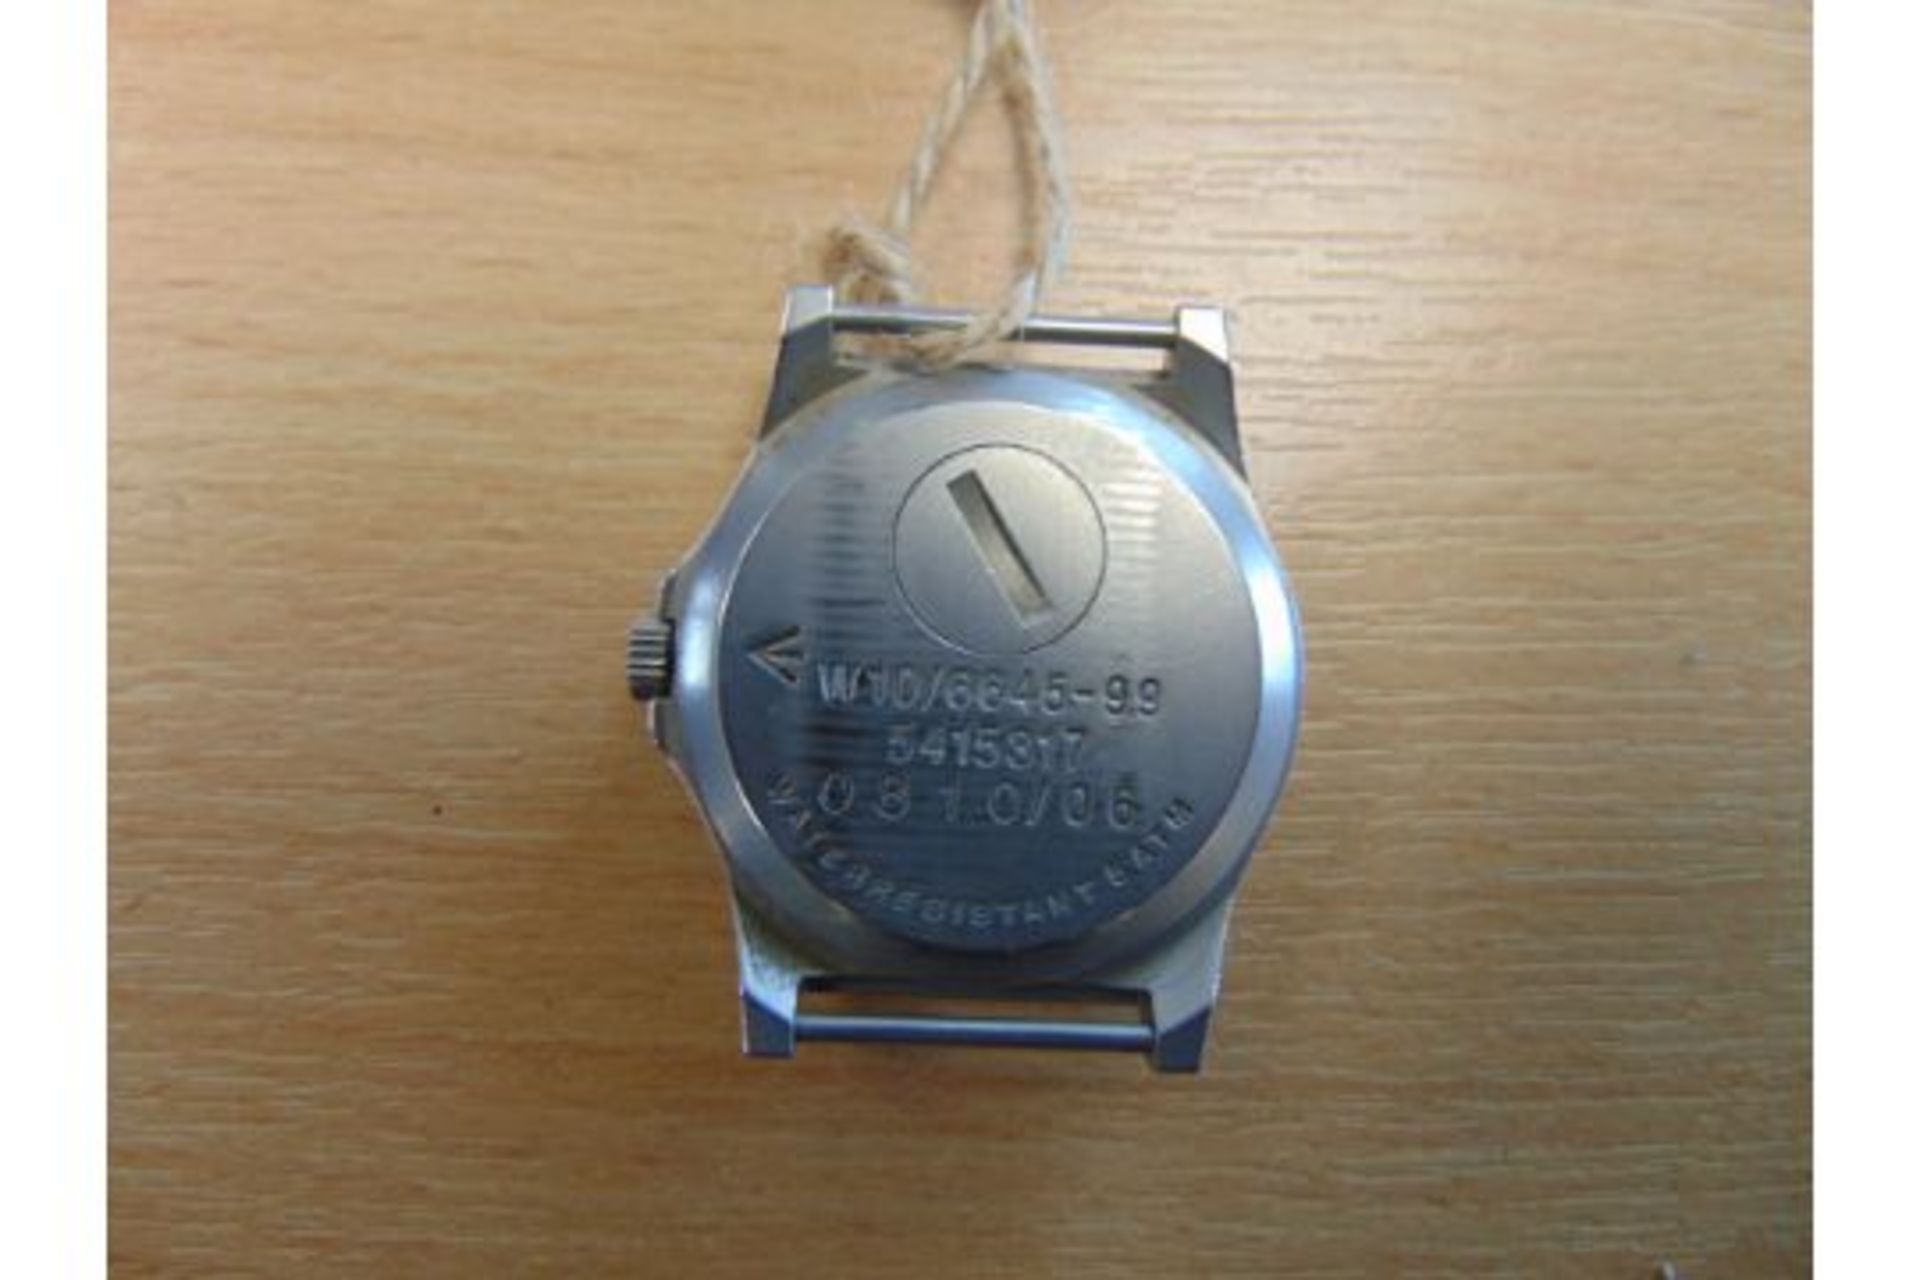 CWC (Cabot Watch Co Switzerland) British Army W10 Service Watch Water Resistant to 5ATM - Image 3 of 3